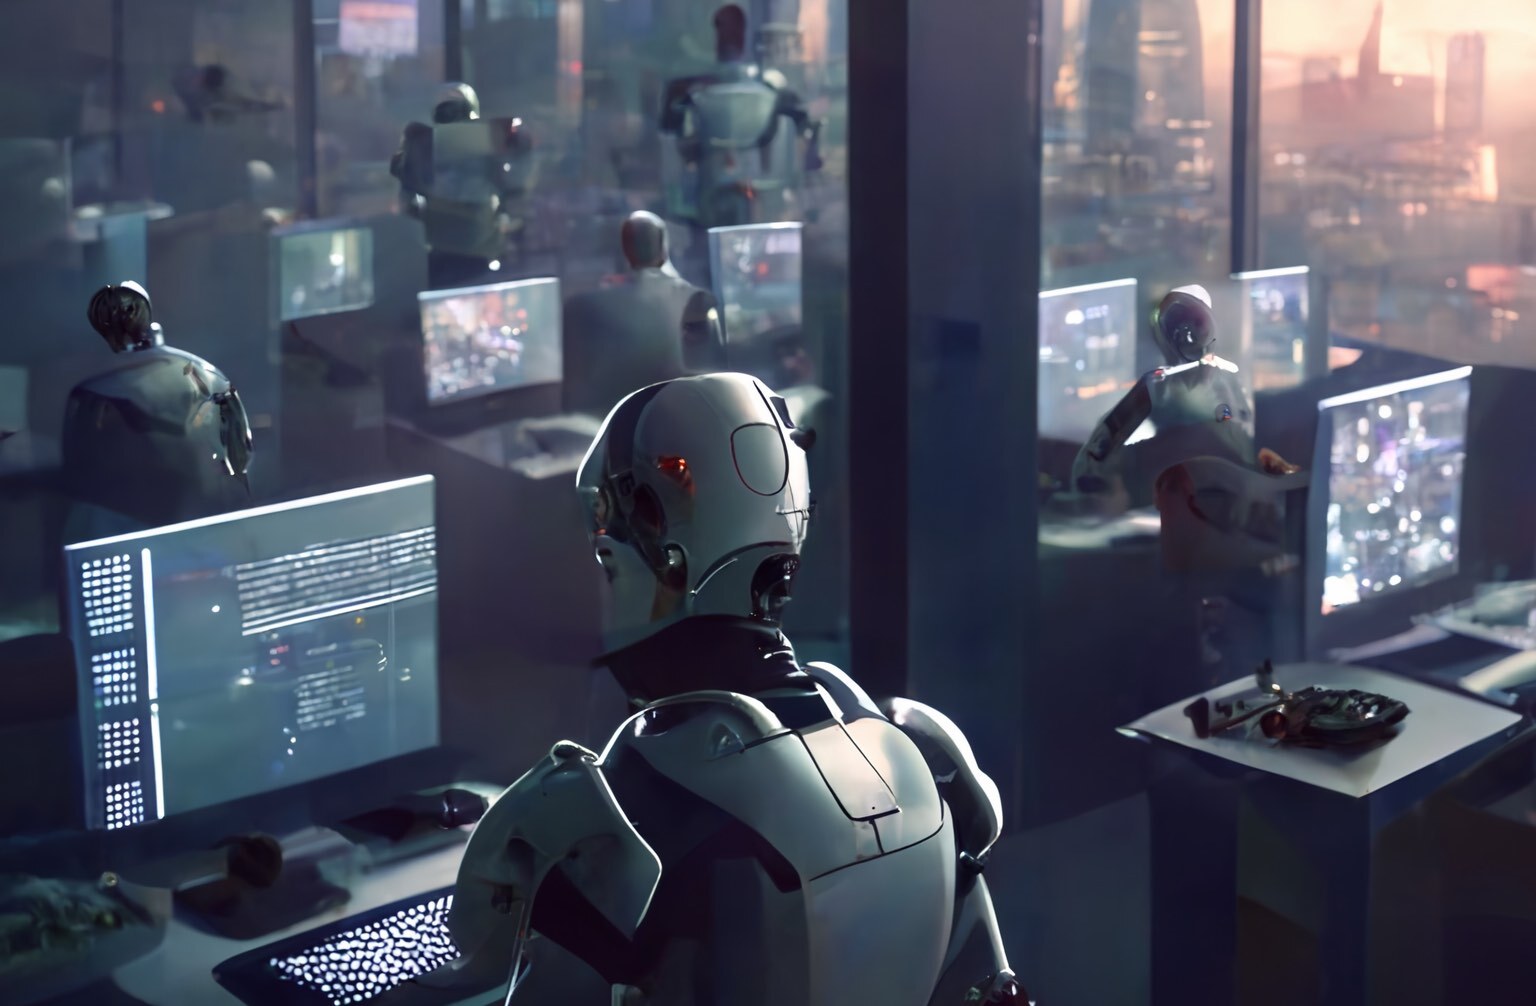 An AI-generated image of robots working on laptops in a modern-looking office.